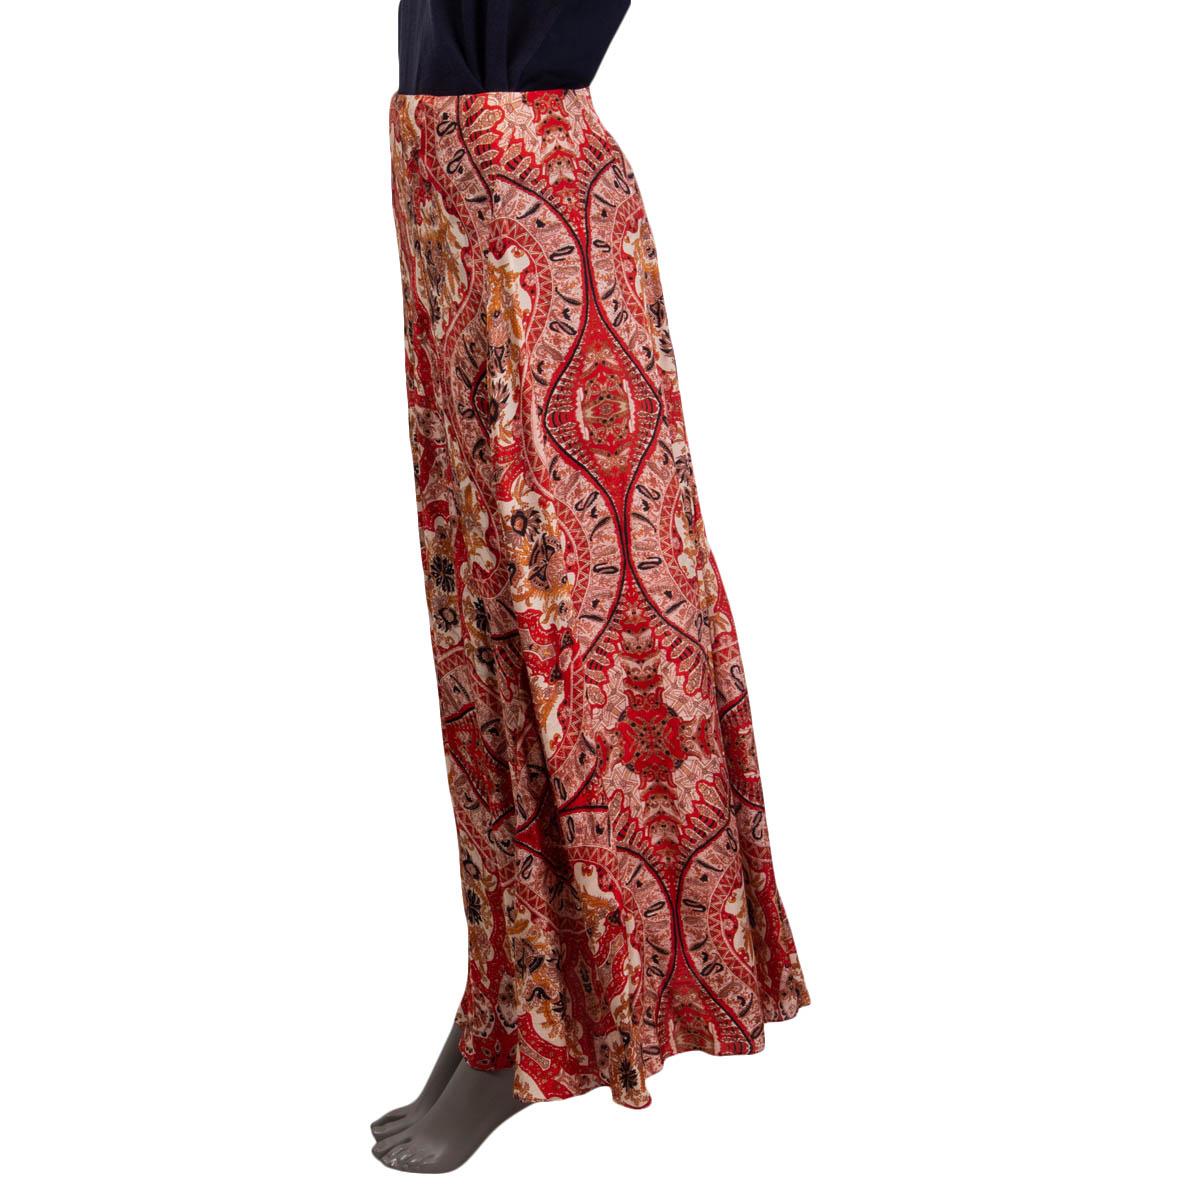 100% authentic Etro a-line skirt in red, black, mustard and off-white viscose (65%) and silk (35%). Features a paisley print. Opens with a concealed zipper and a hook at the back. Unlined. Has been worn and is in excellent condition. 

Matching